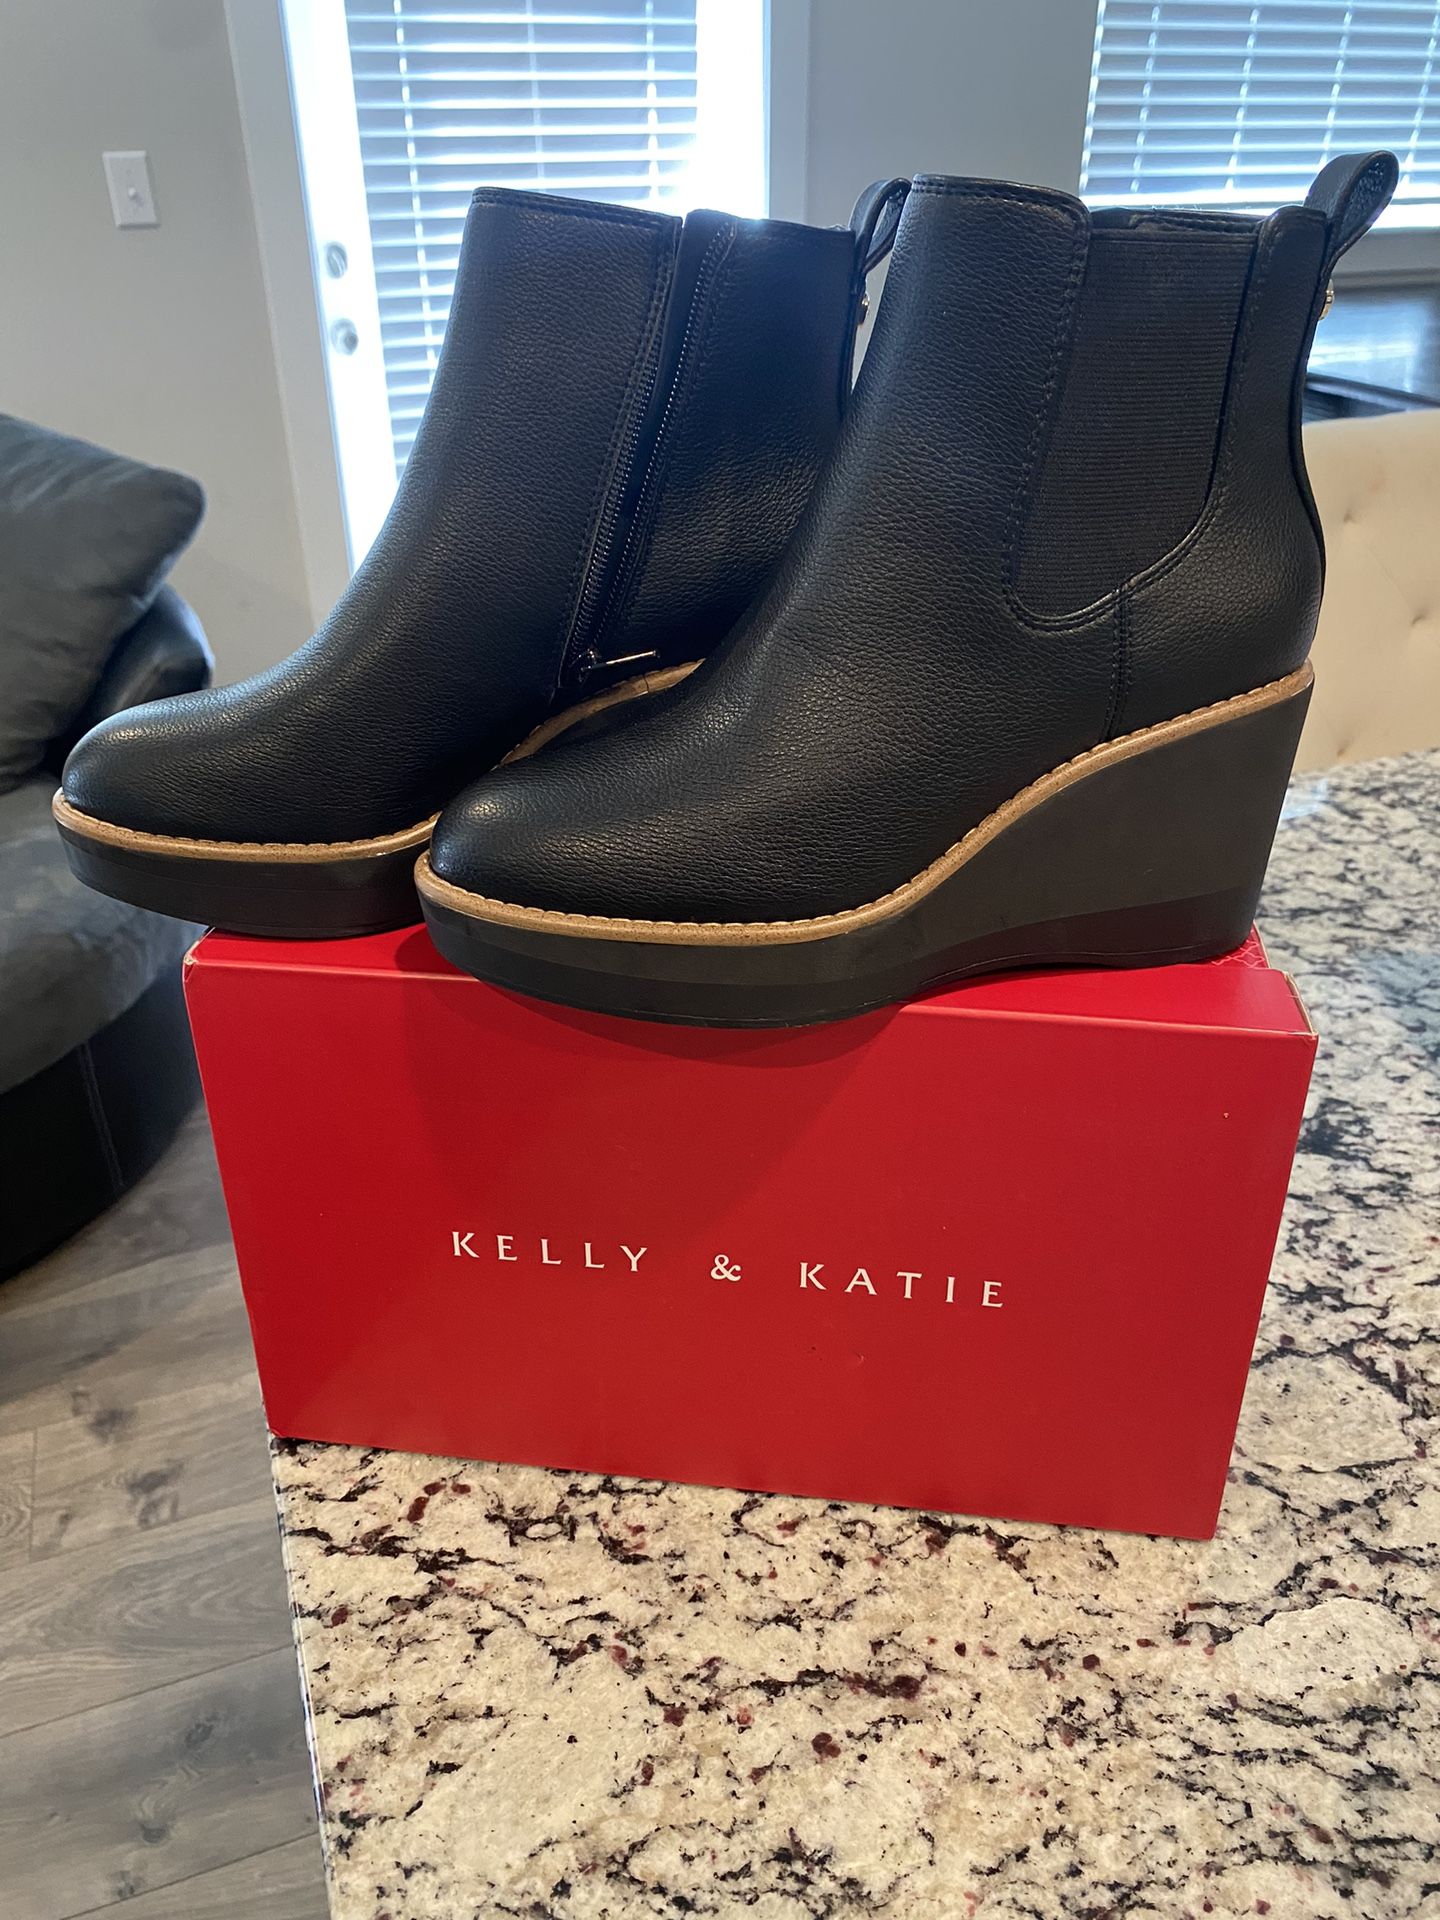 New Kelly & Katie Womens Black Boots Size 6